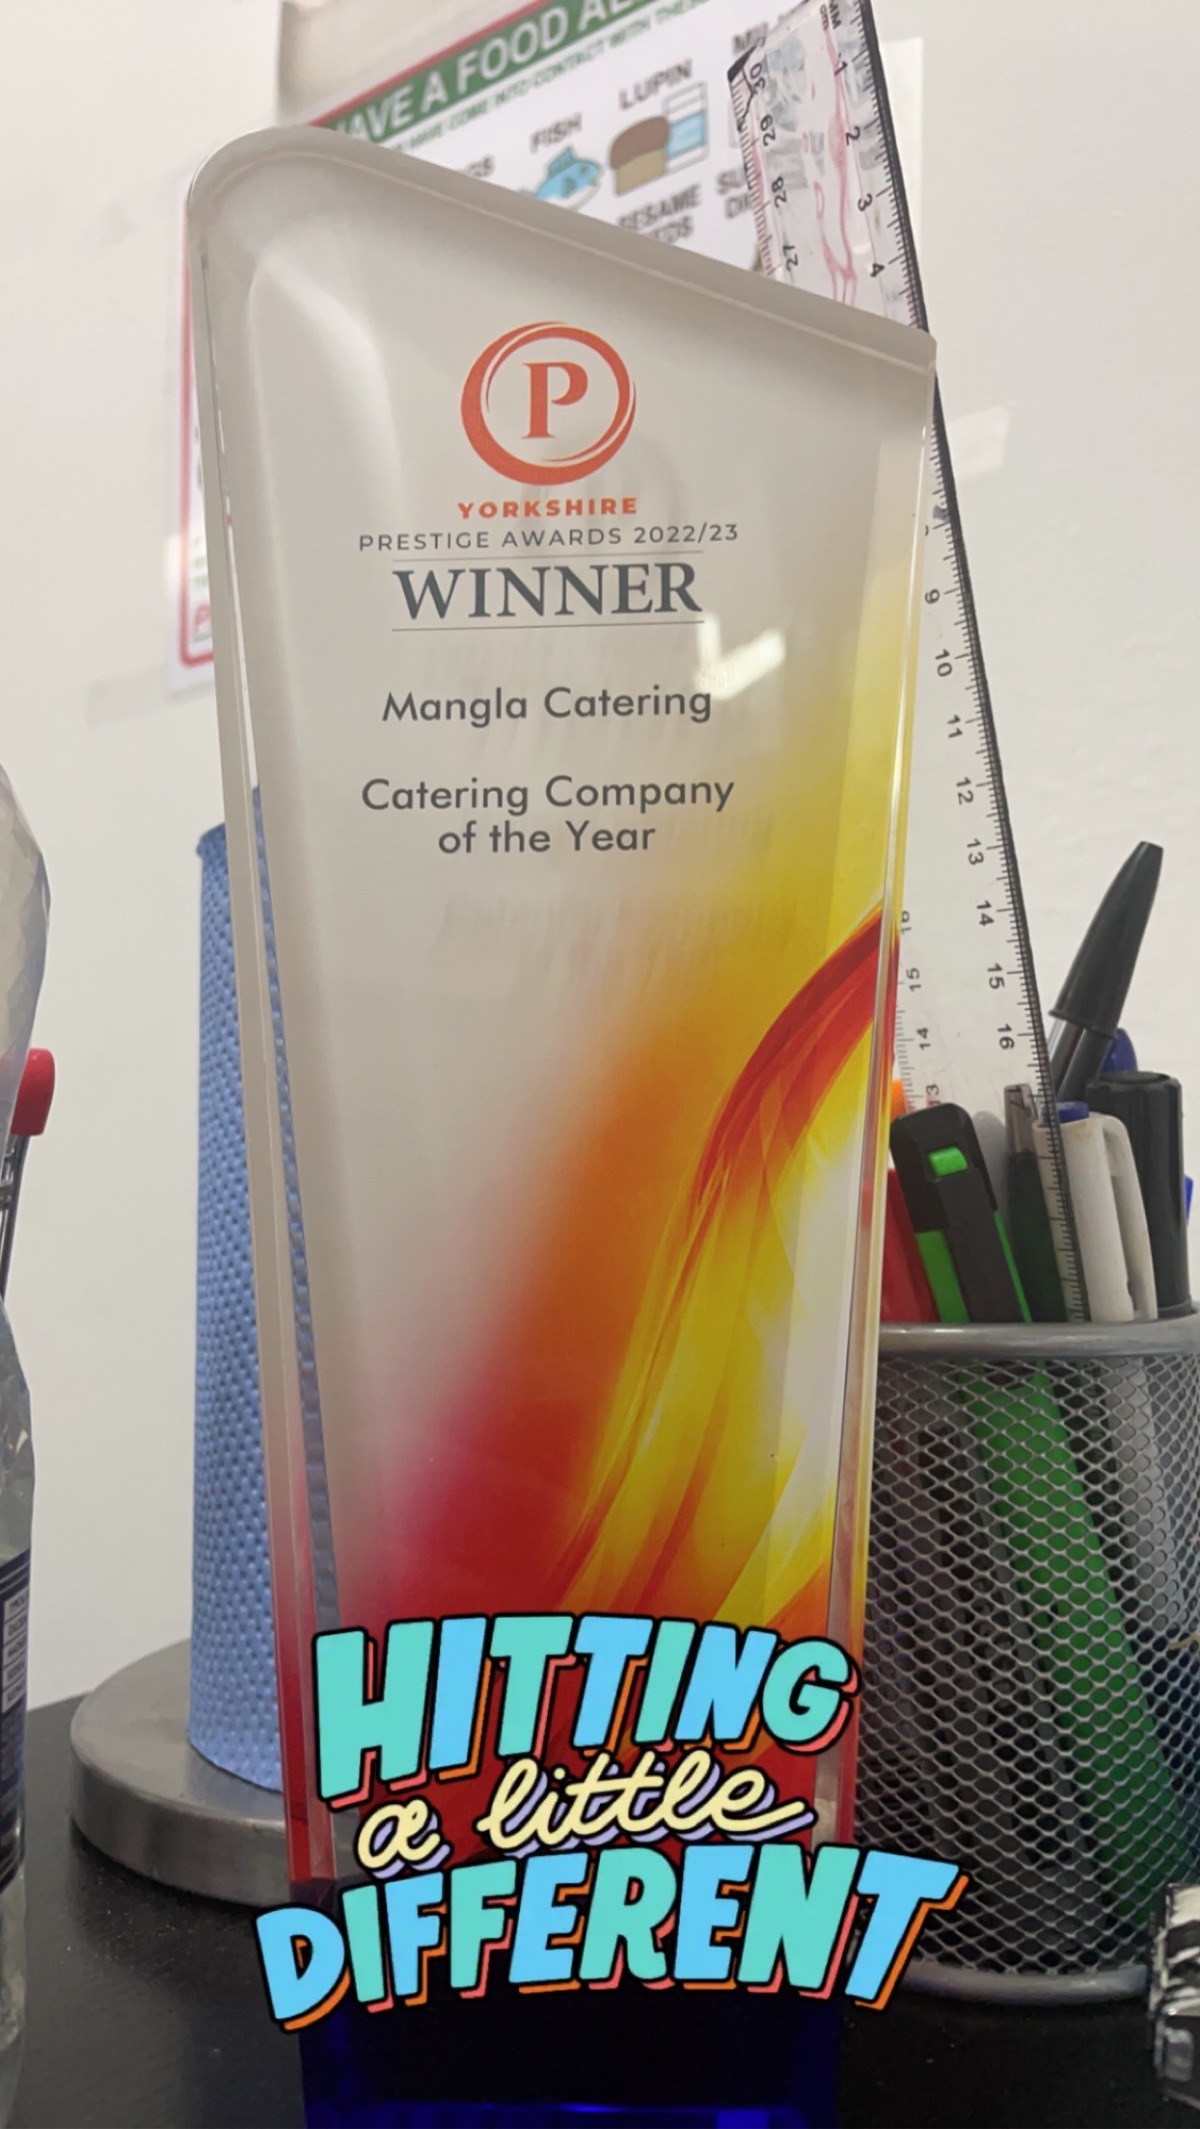 Mangla Catering has received multiple awards and with our first one being with Yorkshire Prestige awards for the catering company of the year 2022/2023 we can assure quality and quantity 